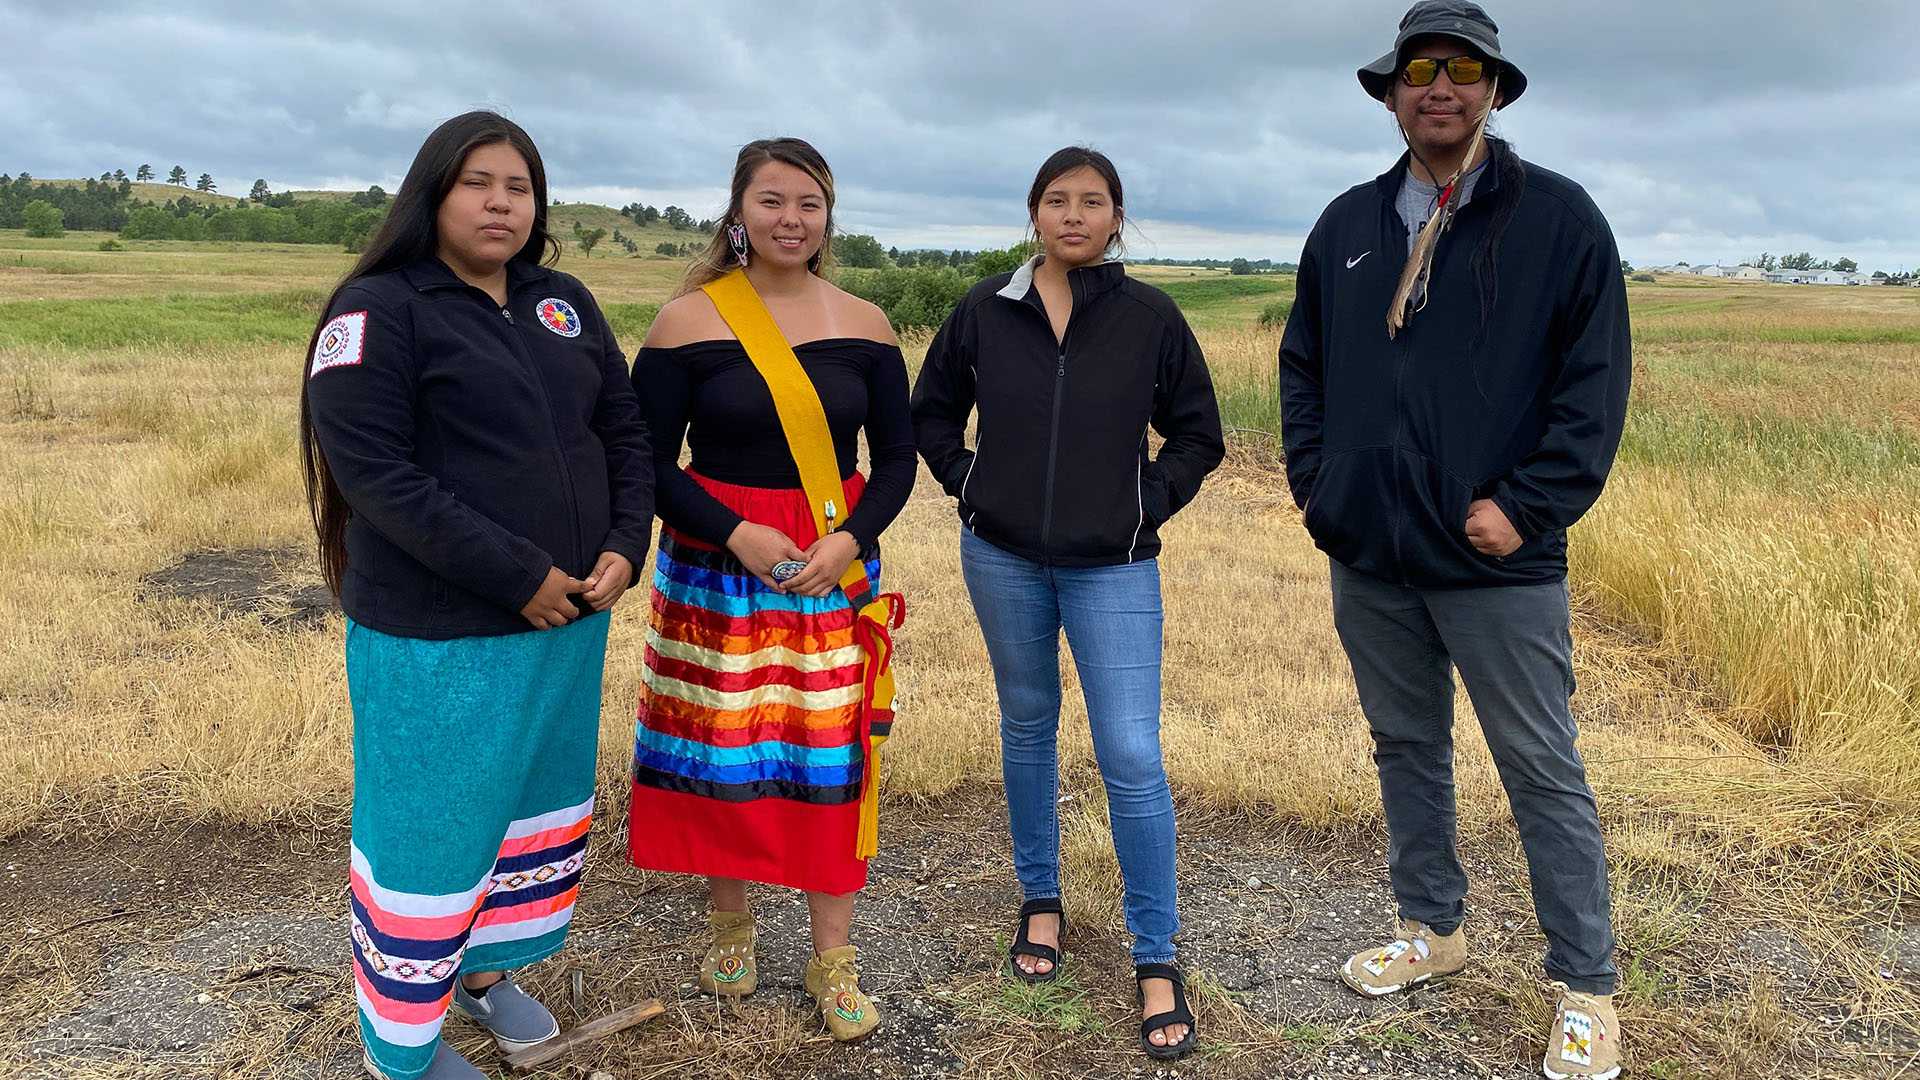 Their children vanished at an Indigenous boarding school. This tribe is bringing them home after 140 years